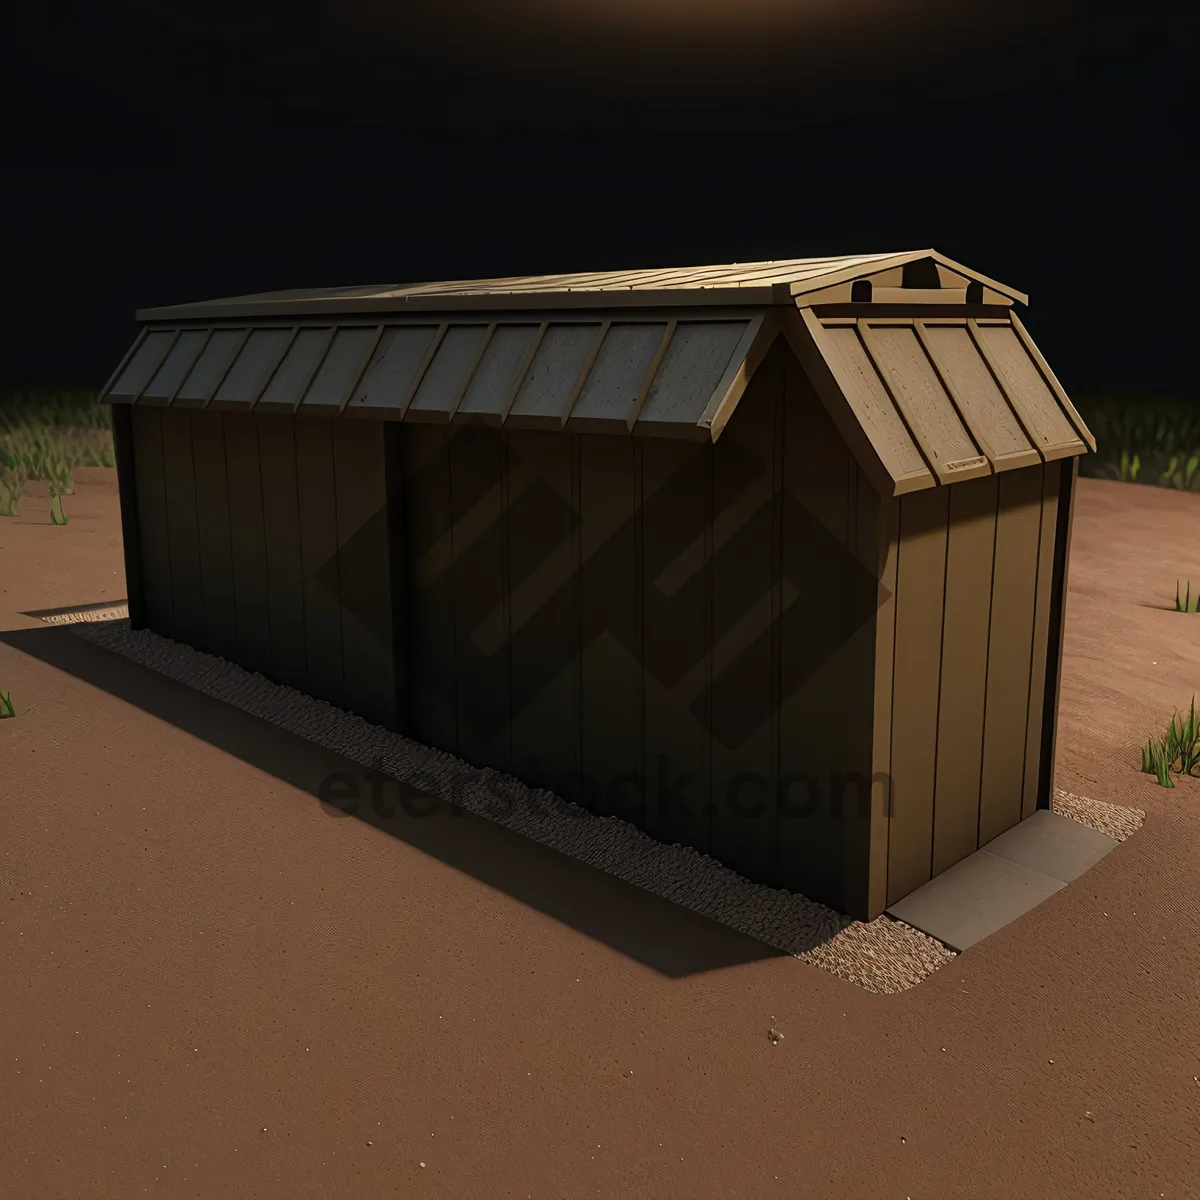 Picture of Crate-box container inside 3D house-building.